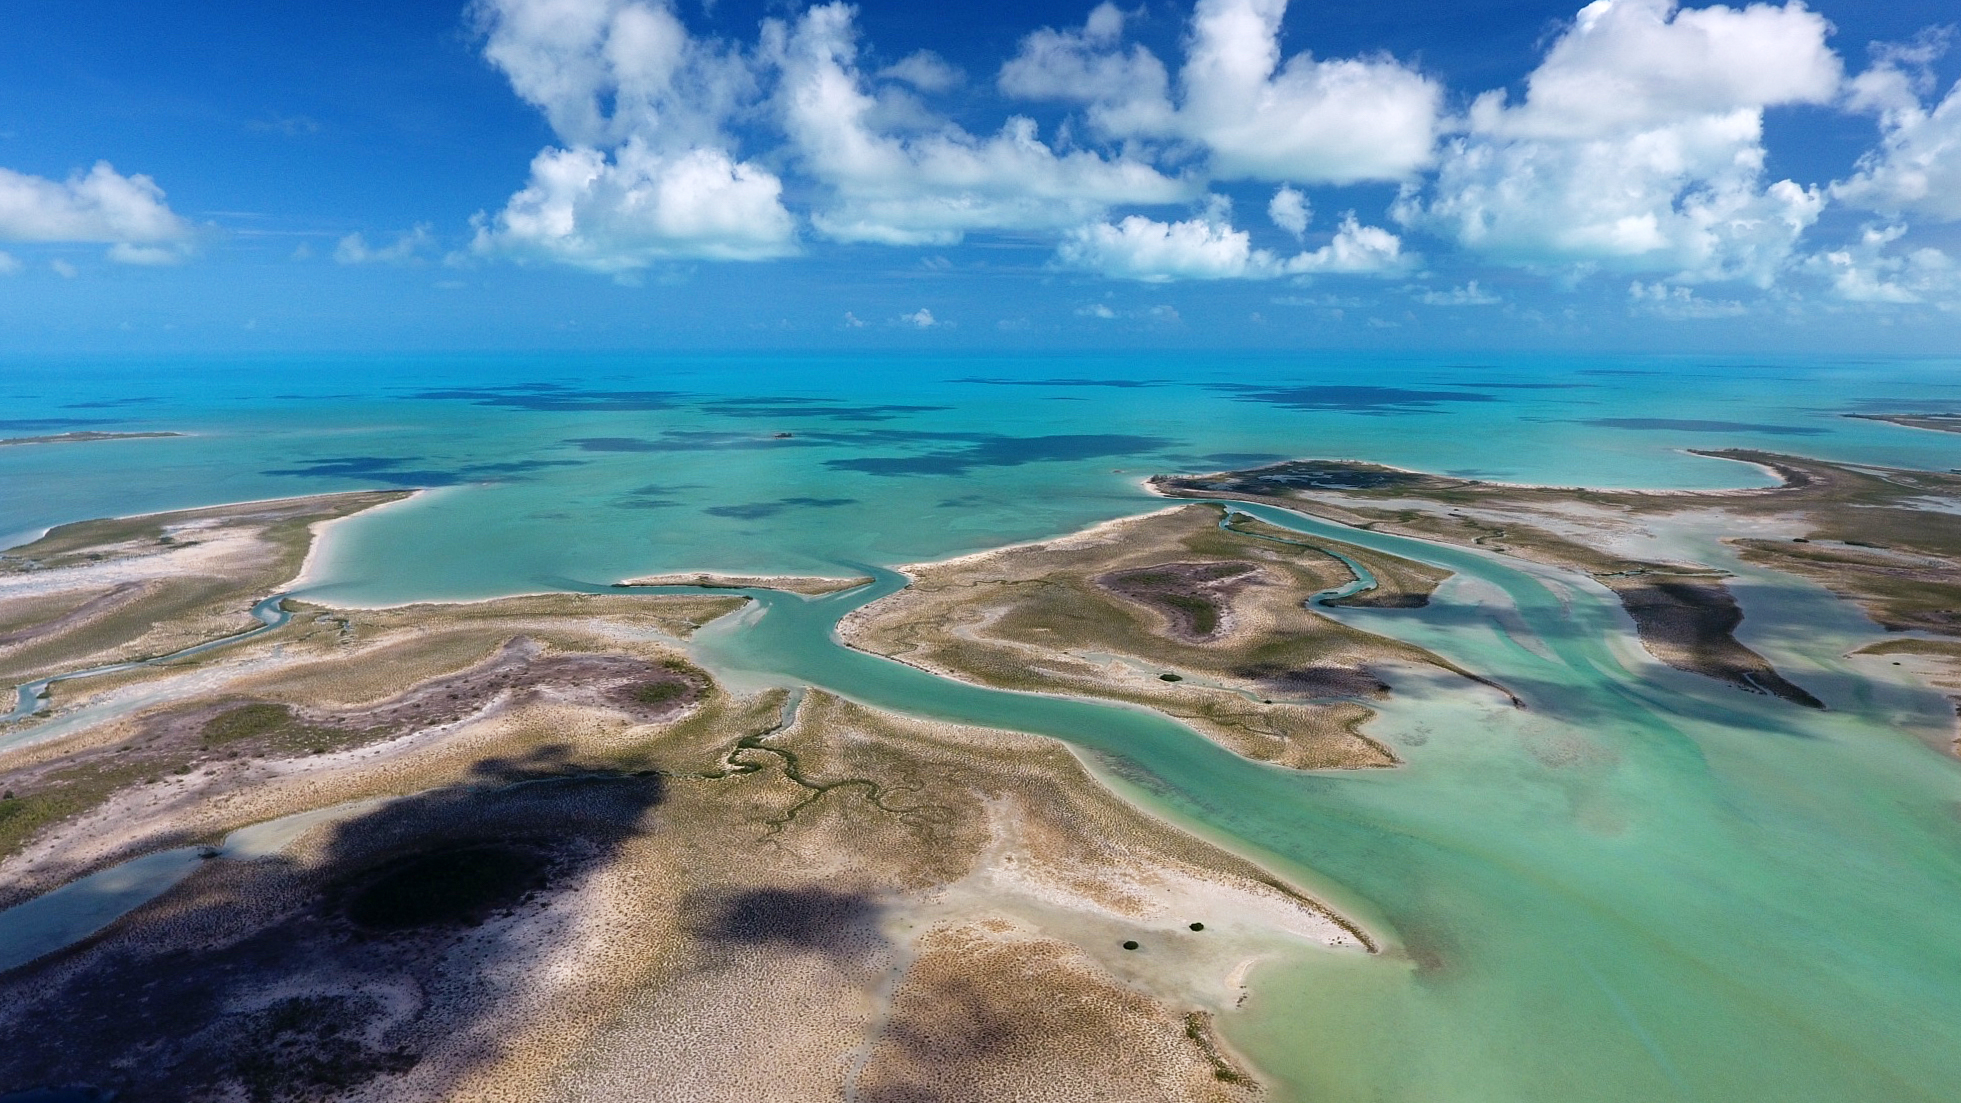 Andros Island - Bahamas - Photo by Michael Scholl - © Save Our Seas Foundation Copyright - DJI_0036.jpg